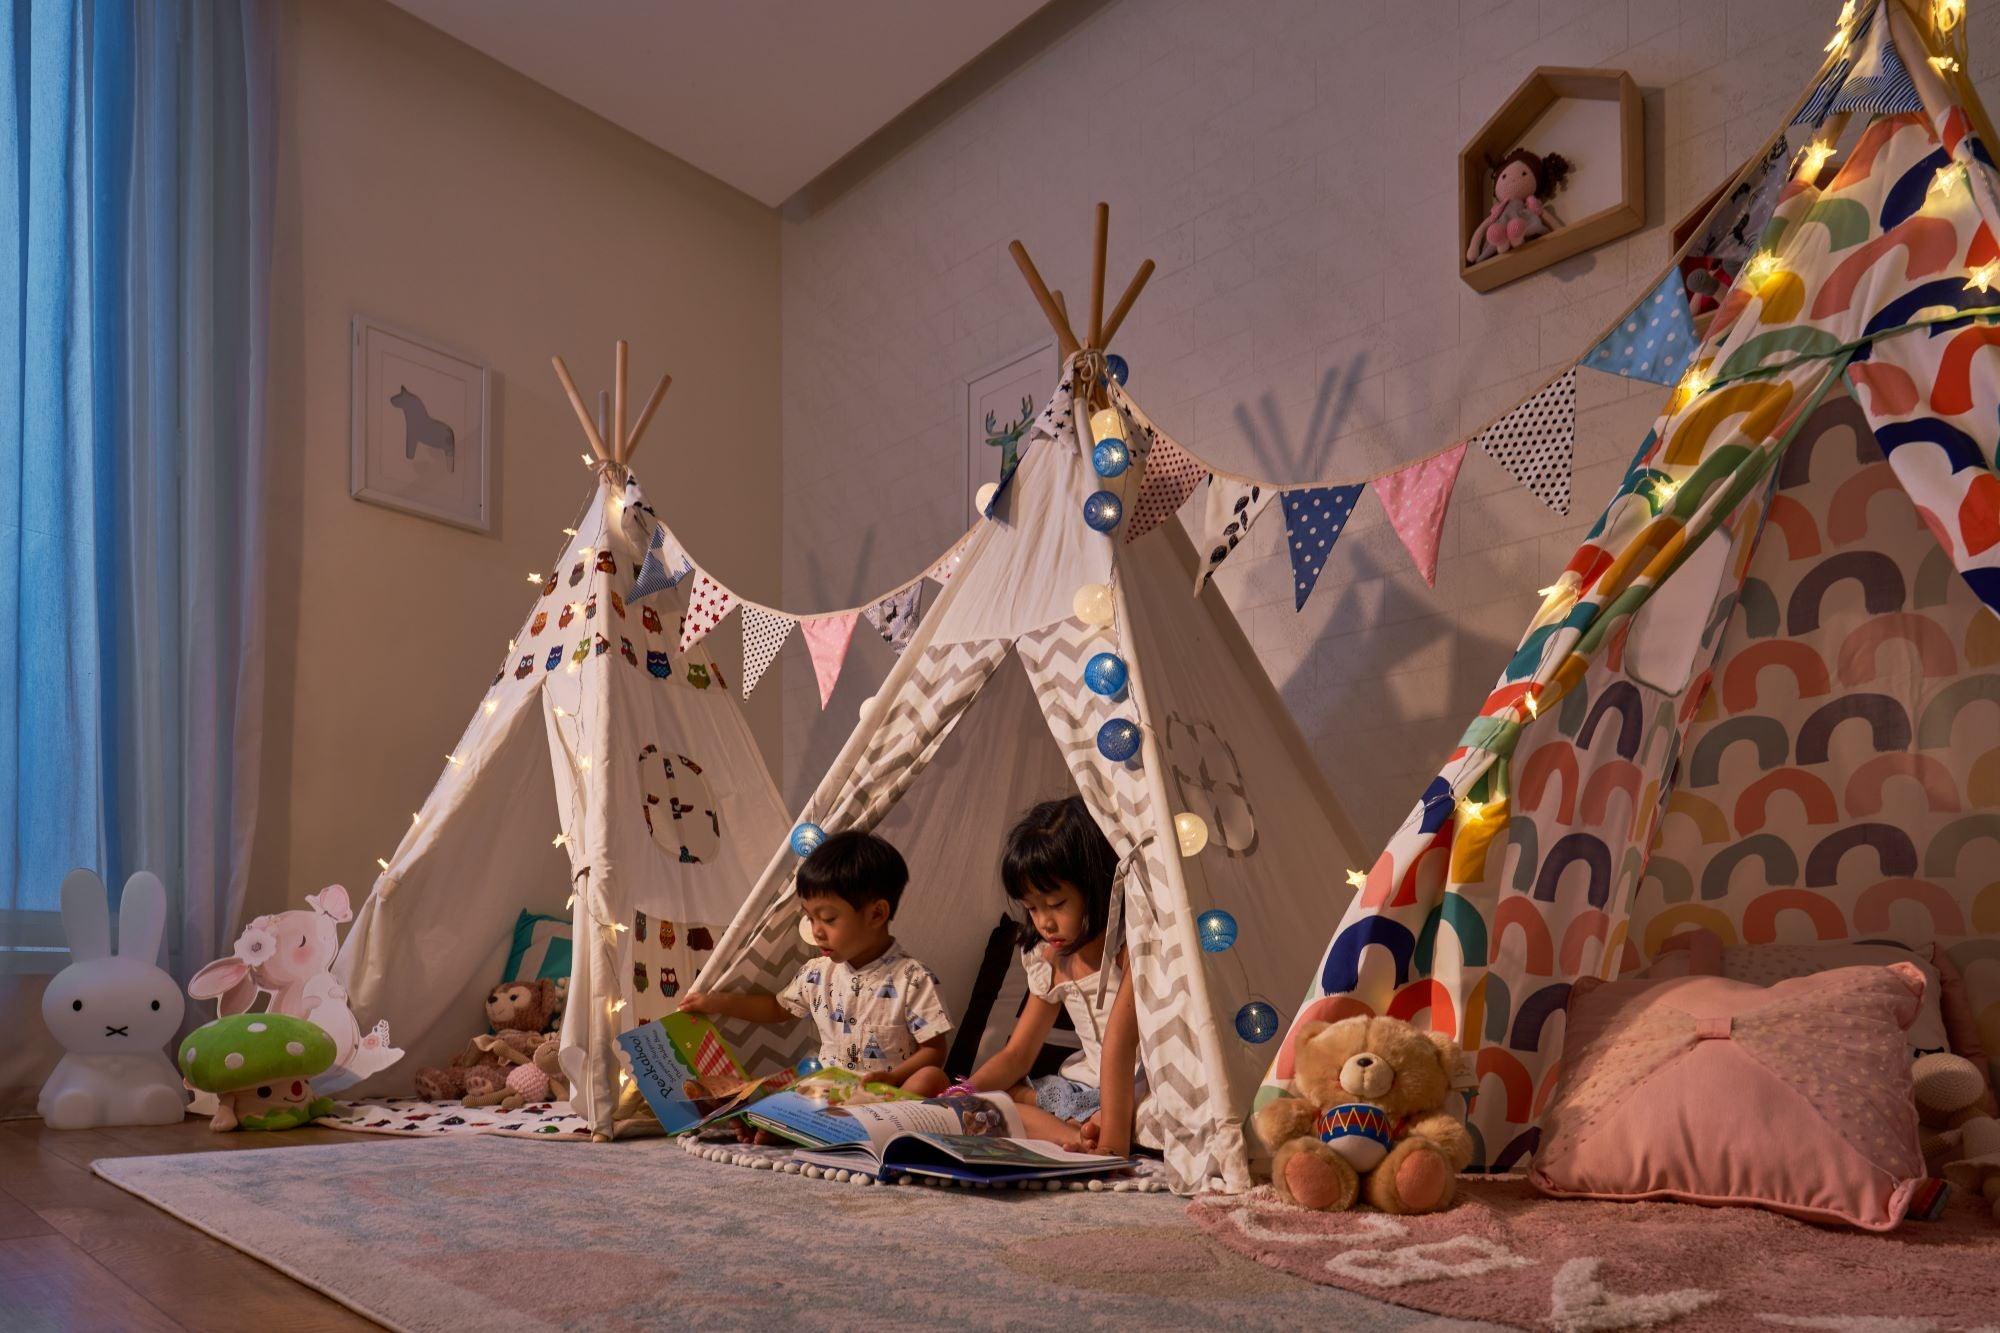 PETIT Rainbow Teepee with lights (mat sold separately) - Kids Haven